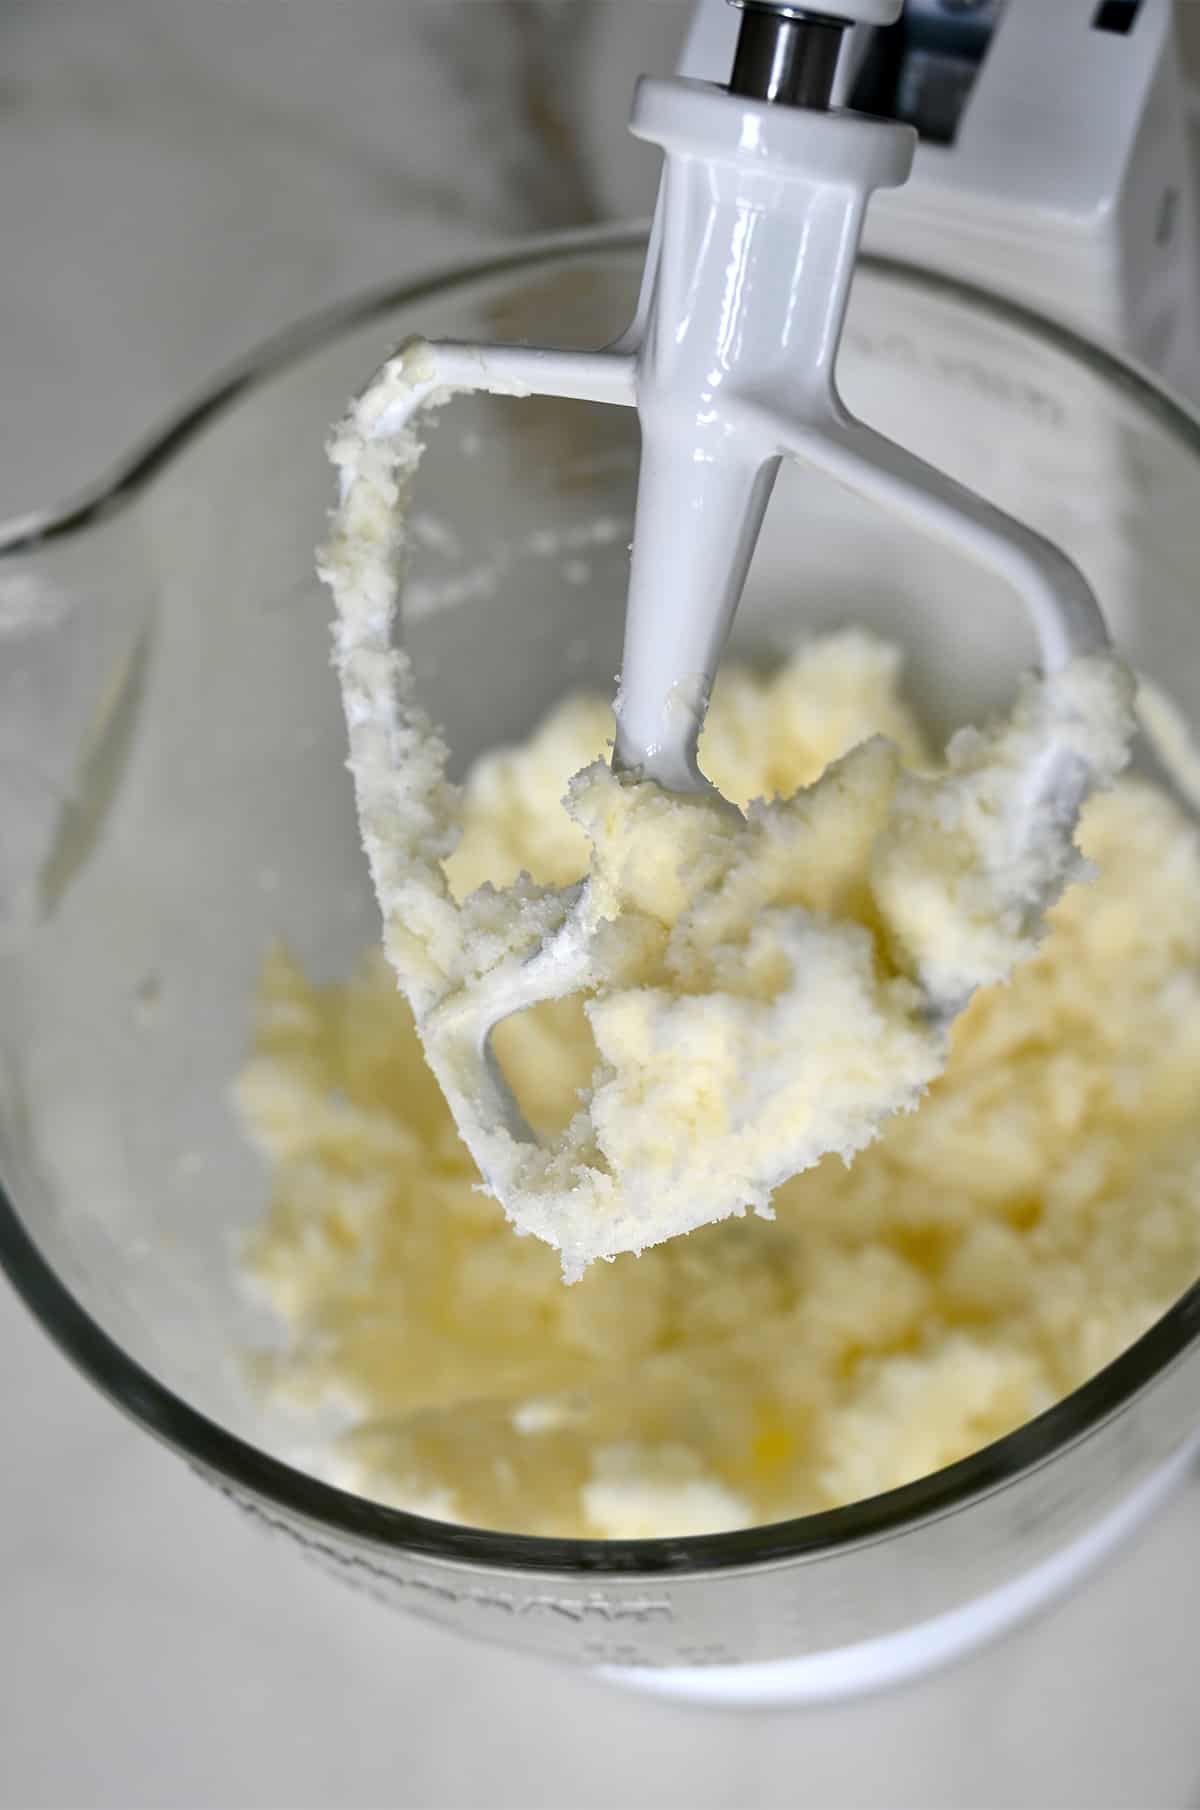 Creamed butter and sugar covering the paddle attachment of a stand mixer bowl.